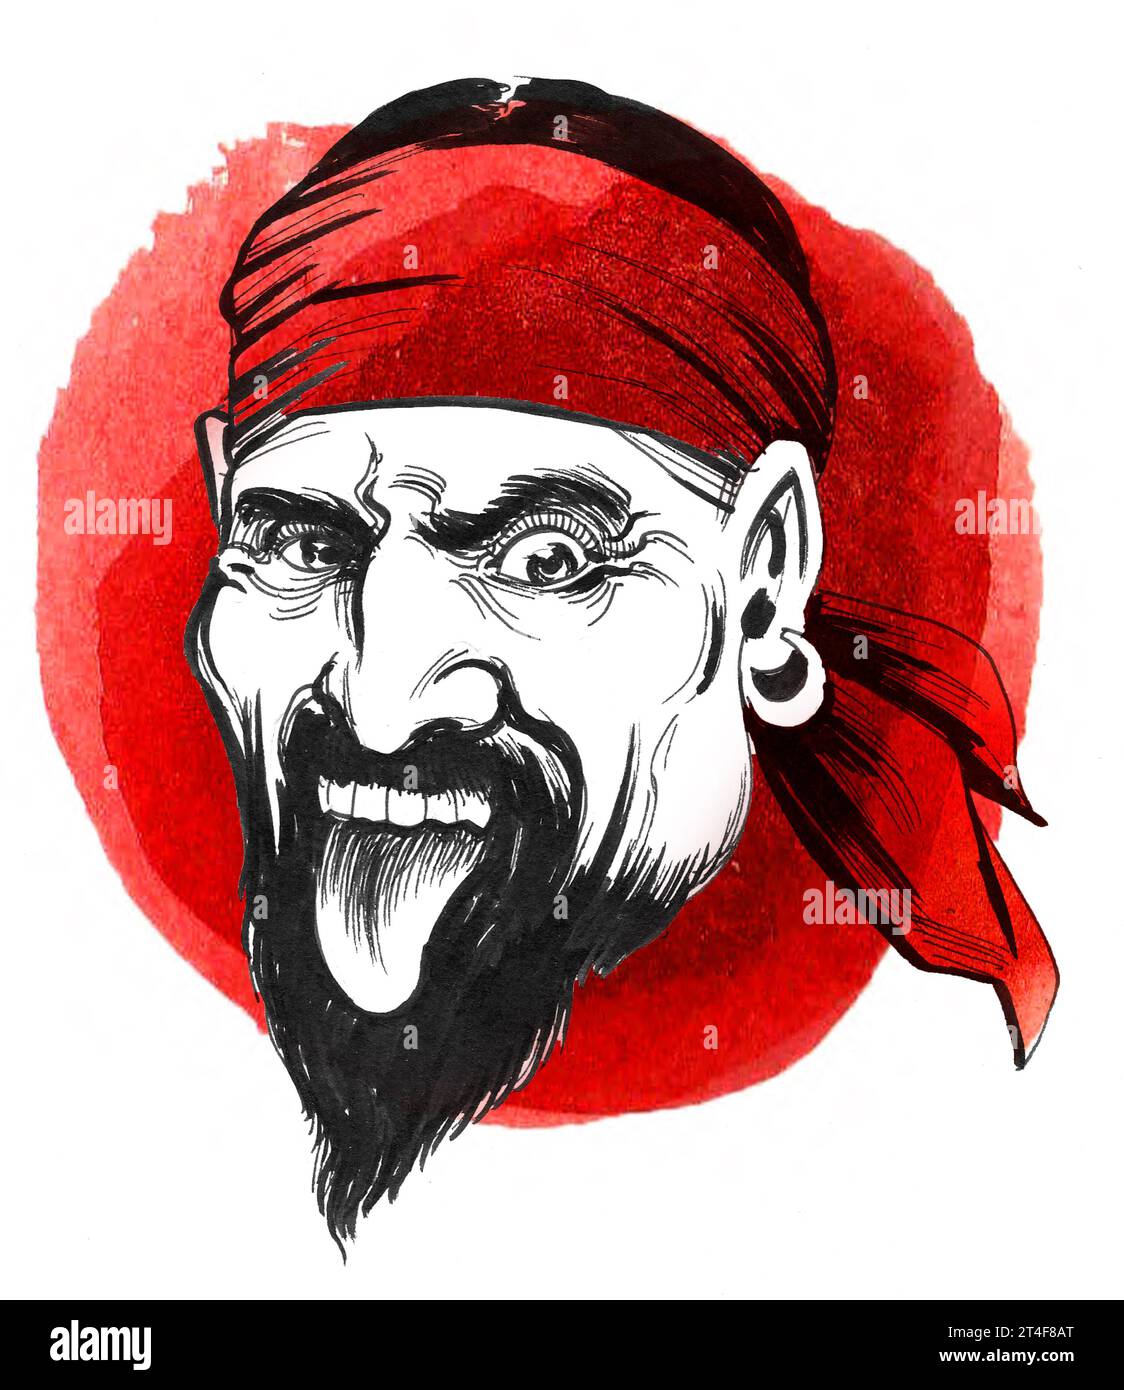 Mad Looking Pirate Face Hand Drawn Illustration Stock Photo Alamy